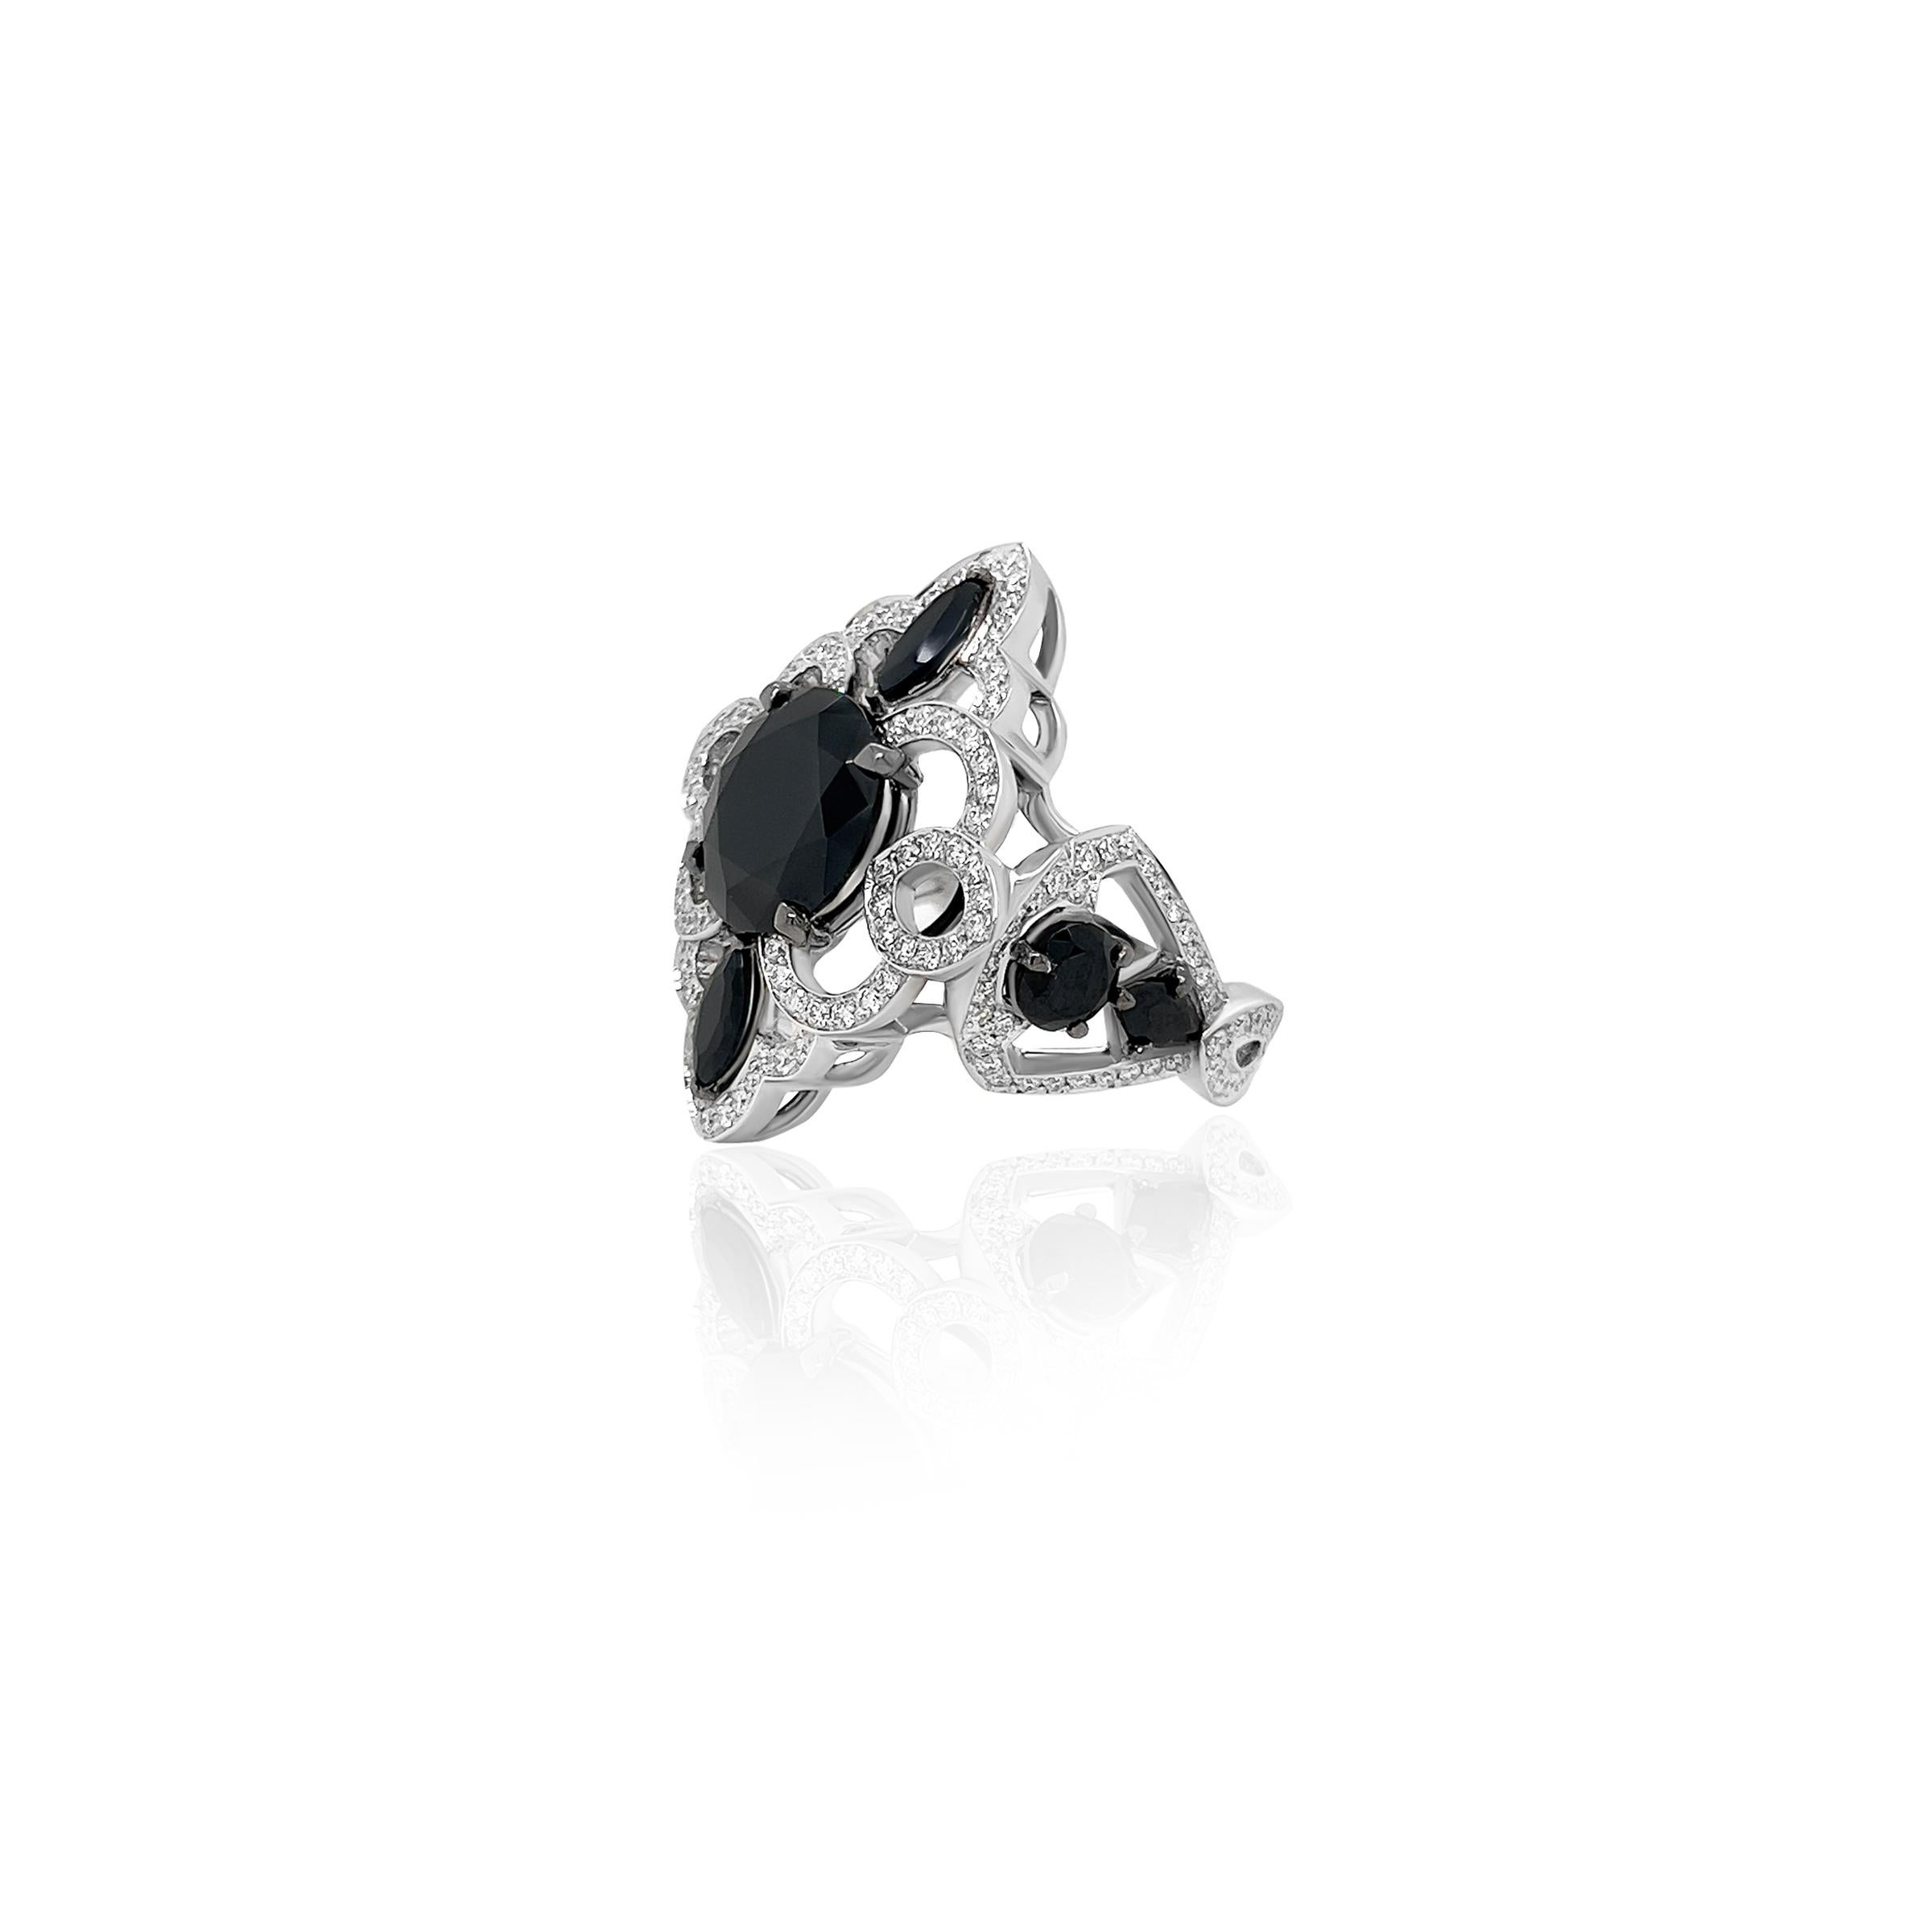 Art Deco 3.72 Carat Black Spinel and Diamond Ring in 18k White Gold  For Sale